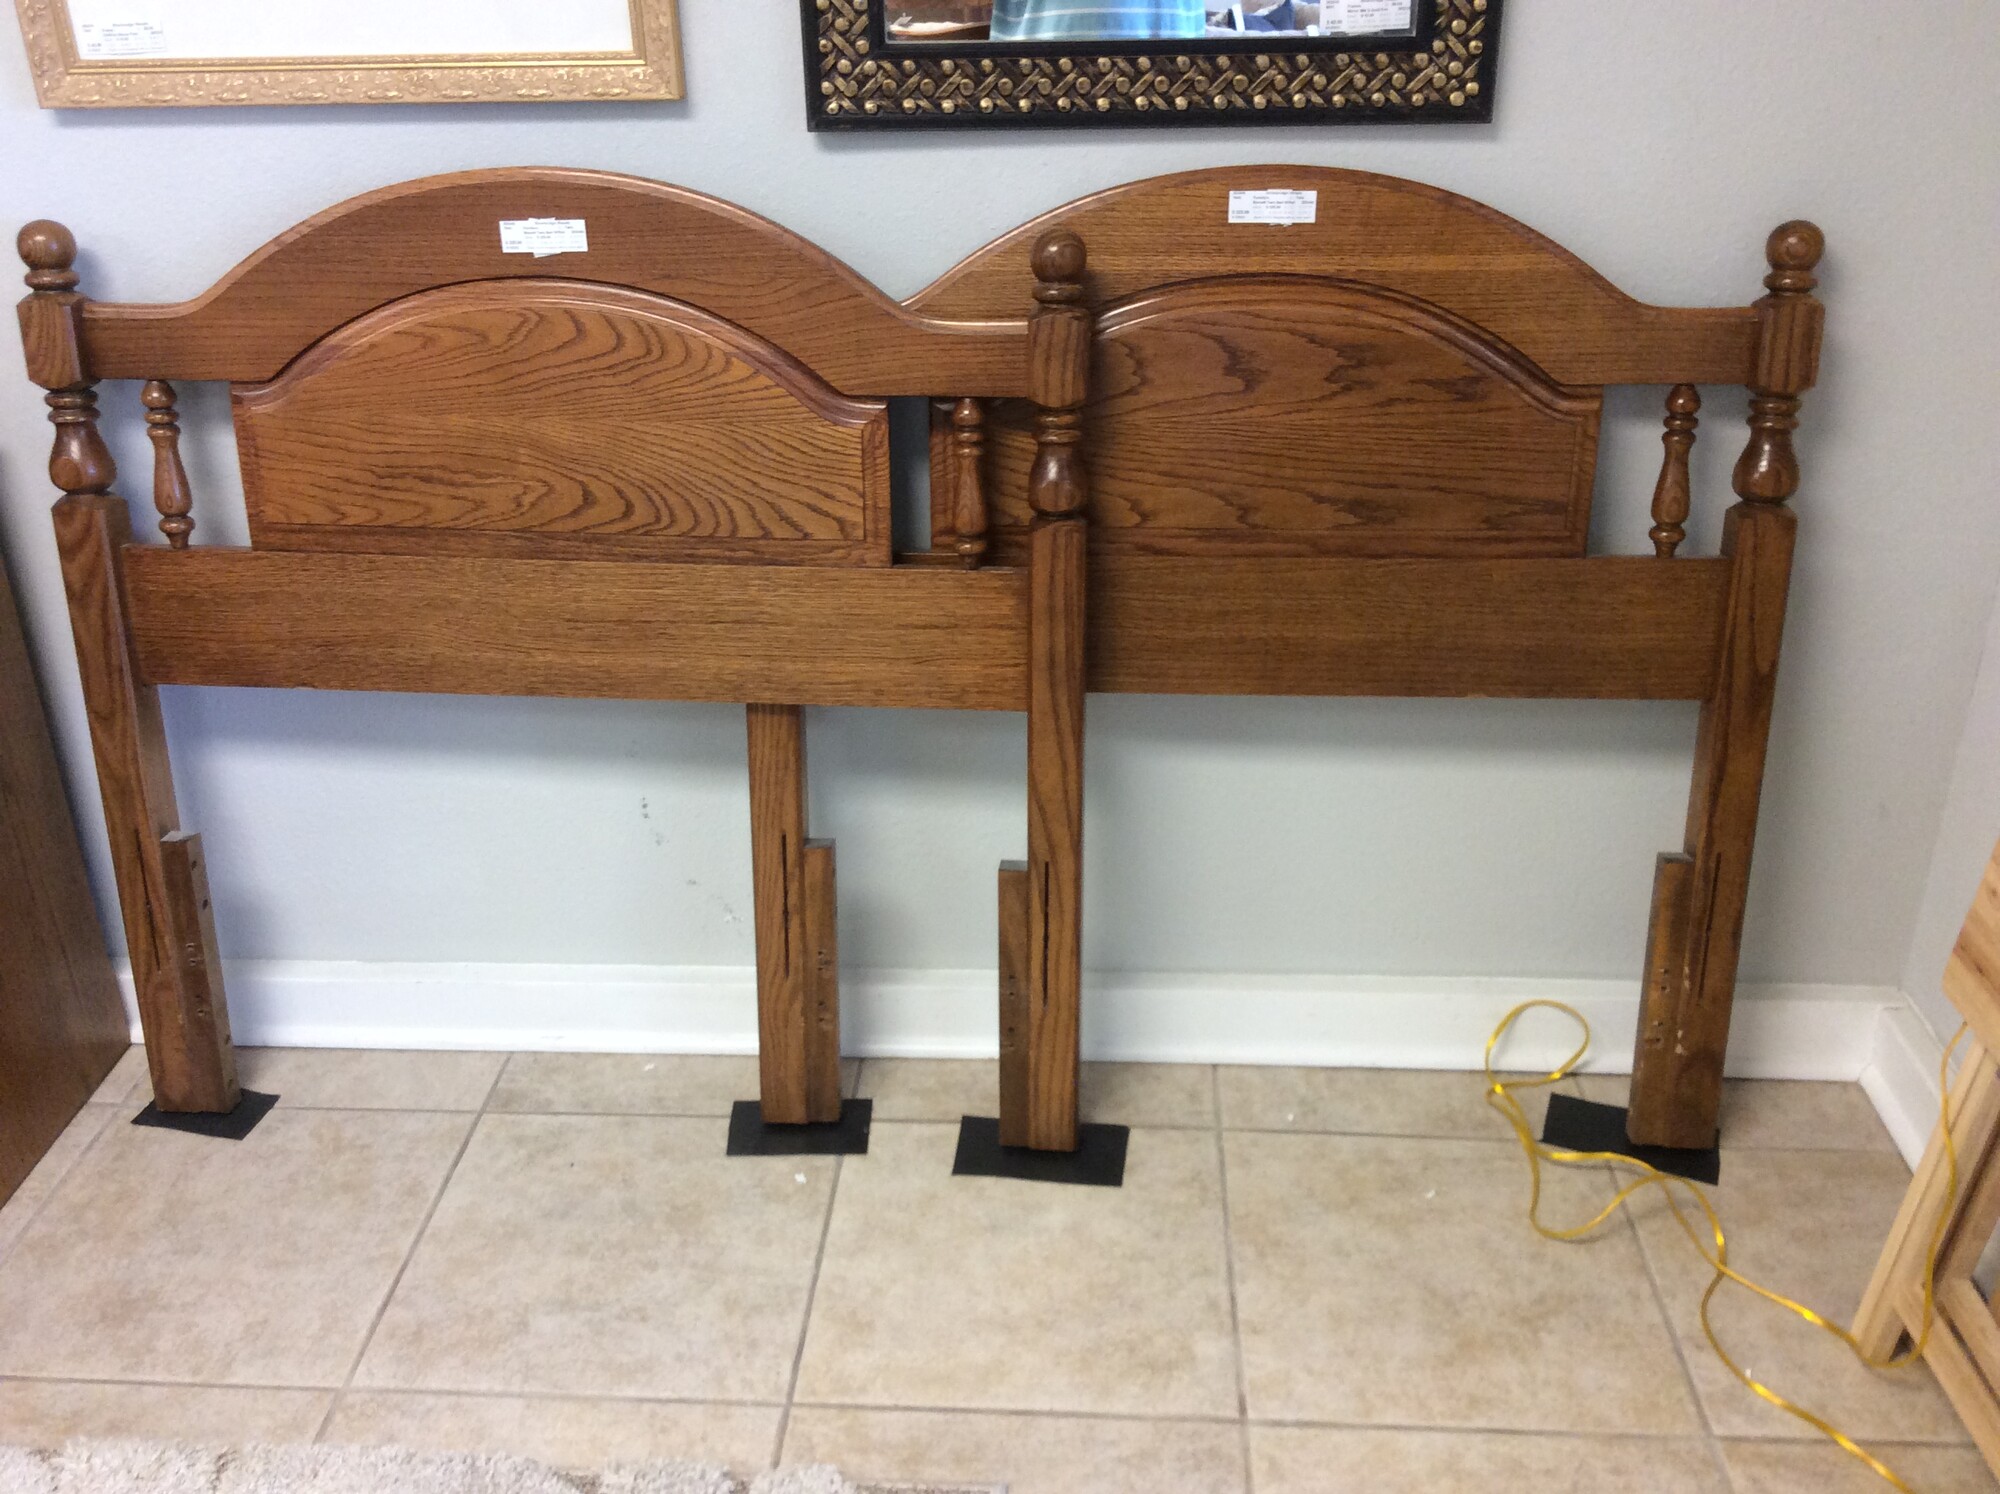 Bassett Twin Bed Headboard. this headboard has a tirger wood finish and comes with rails.